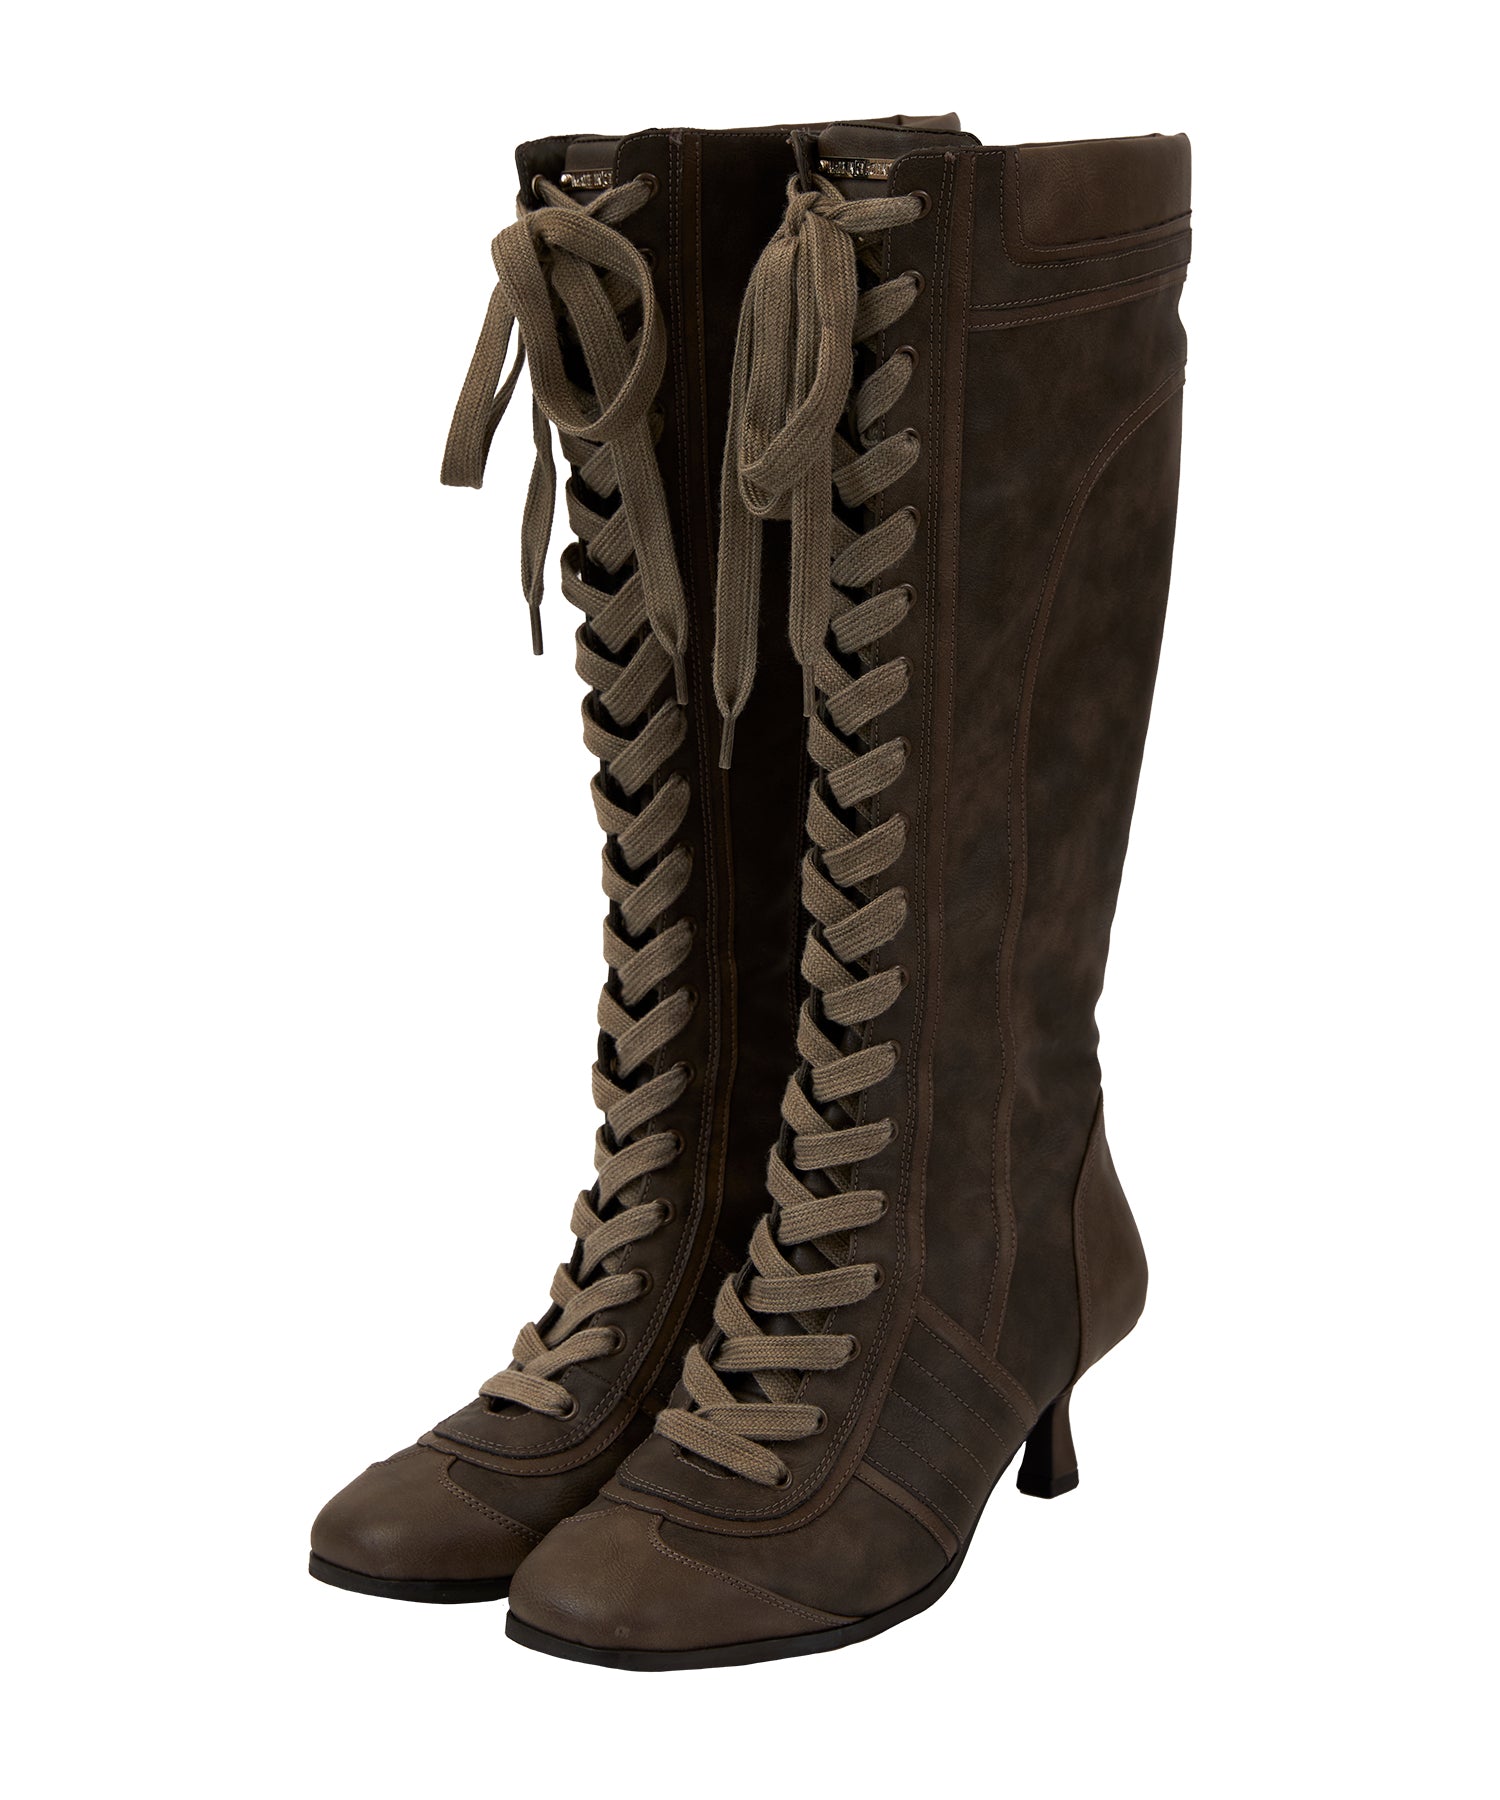 Lace up switching long boots